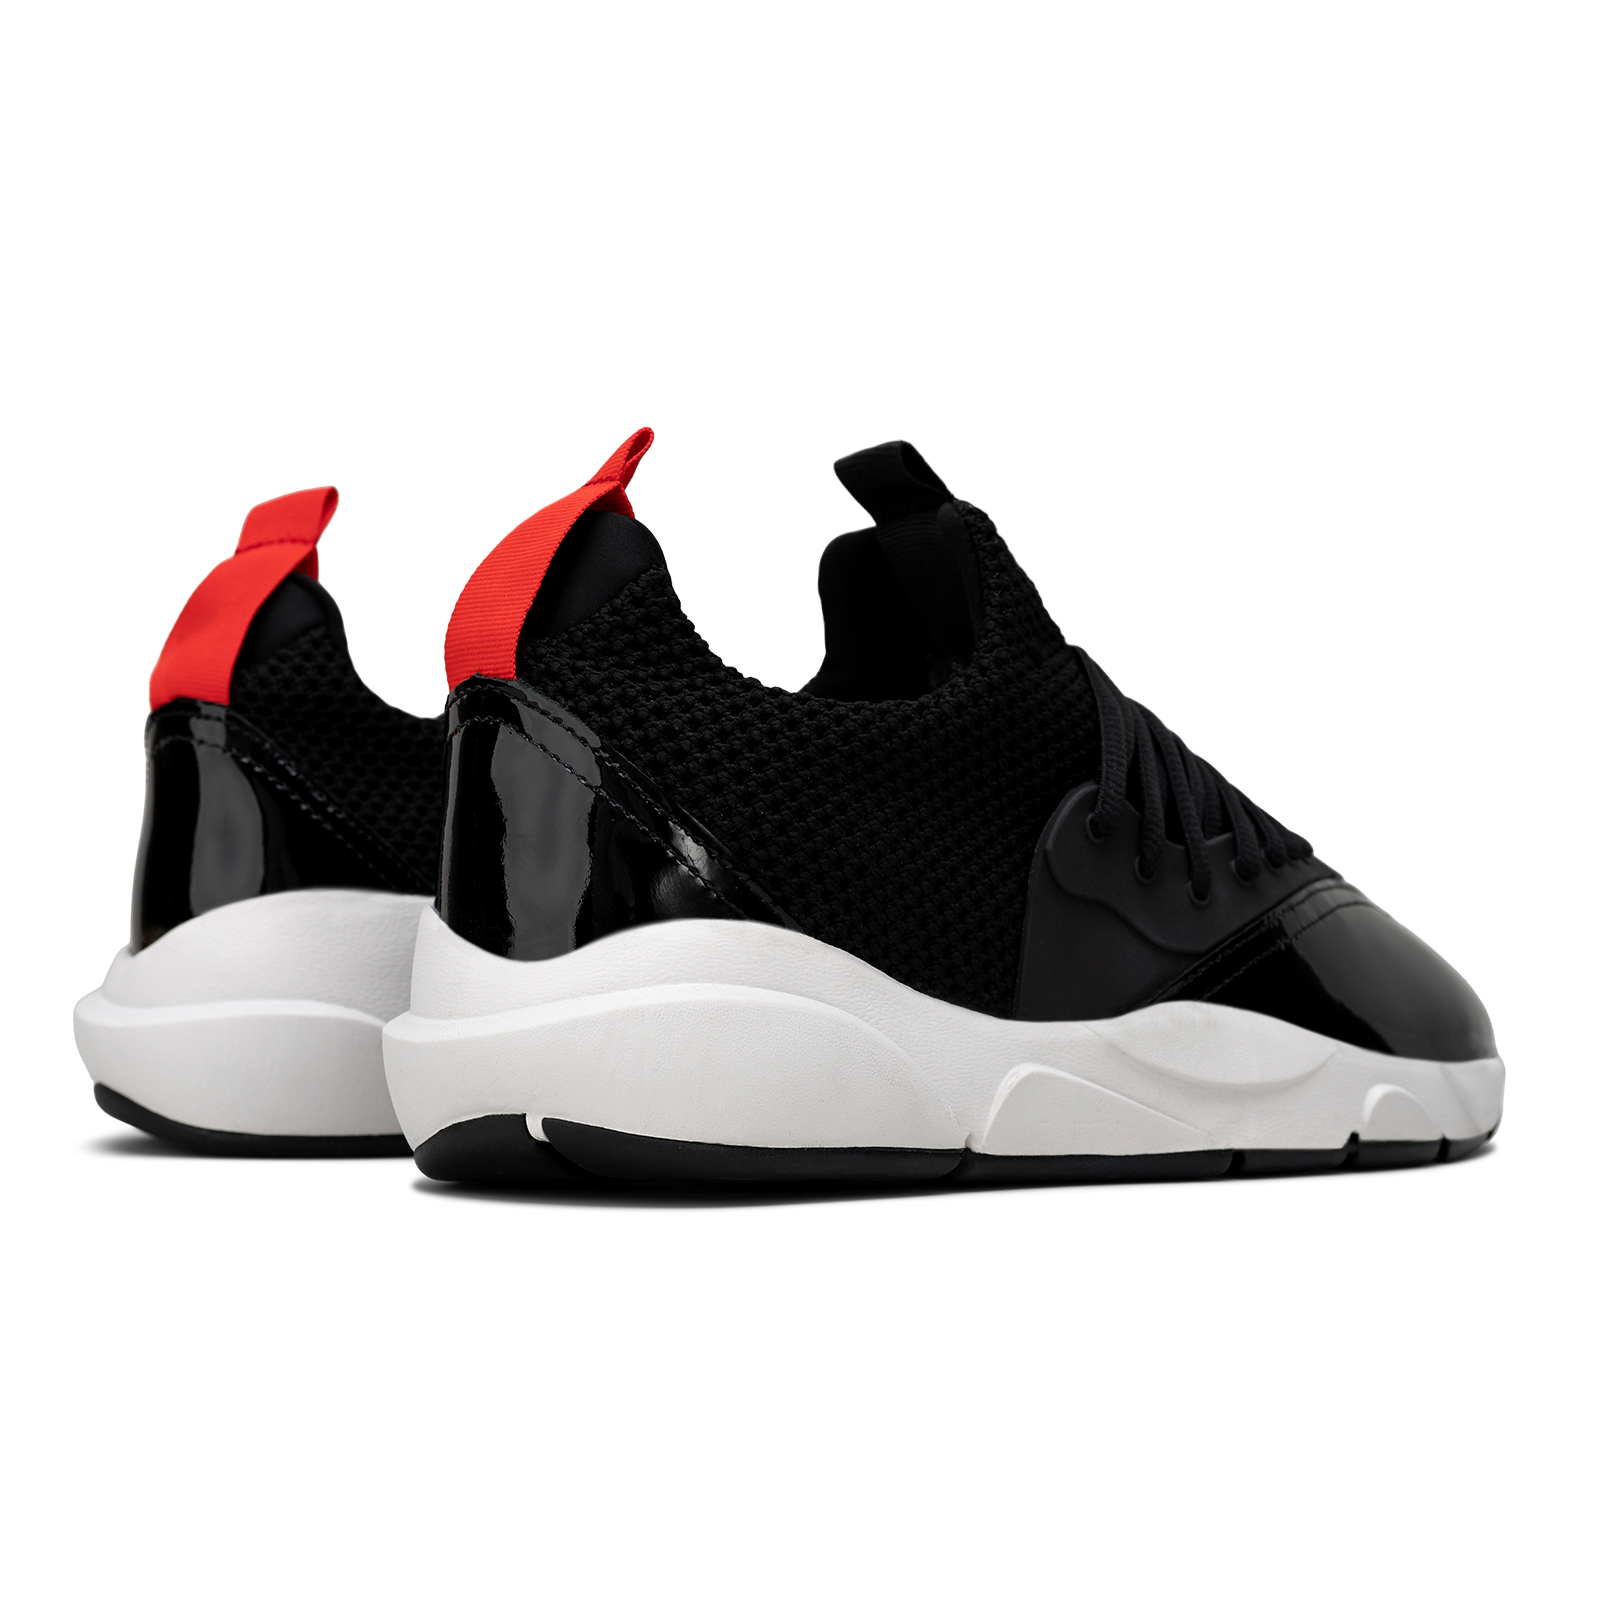 Back 3/4 view, Cloudstryk Advantage is a runner with Black patent leather and suede overlays zoom mesh underlays, red heel pull molded lace holder, white eva midsol and a translucent black rubber outsole.